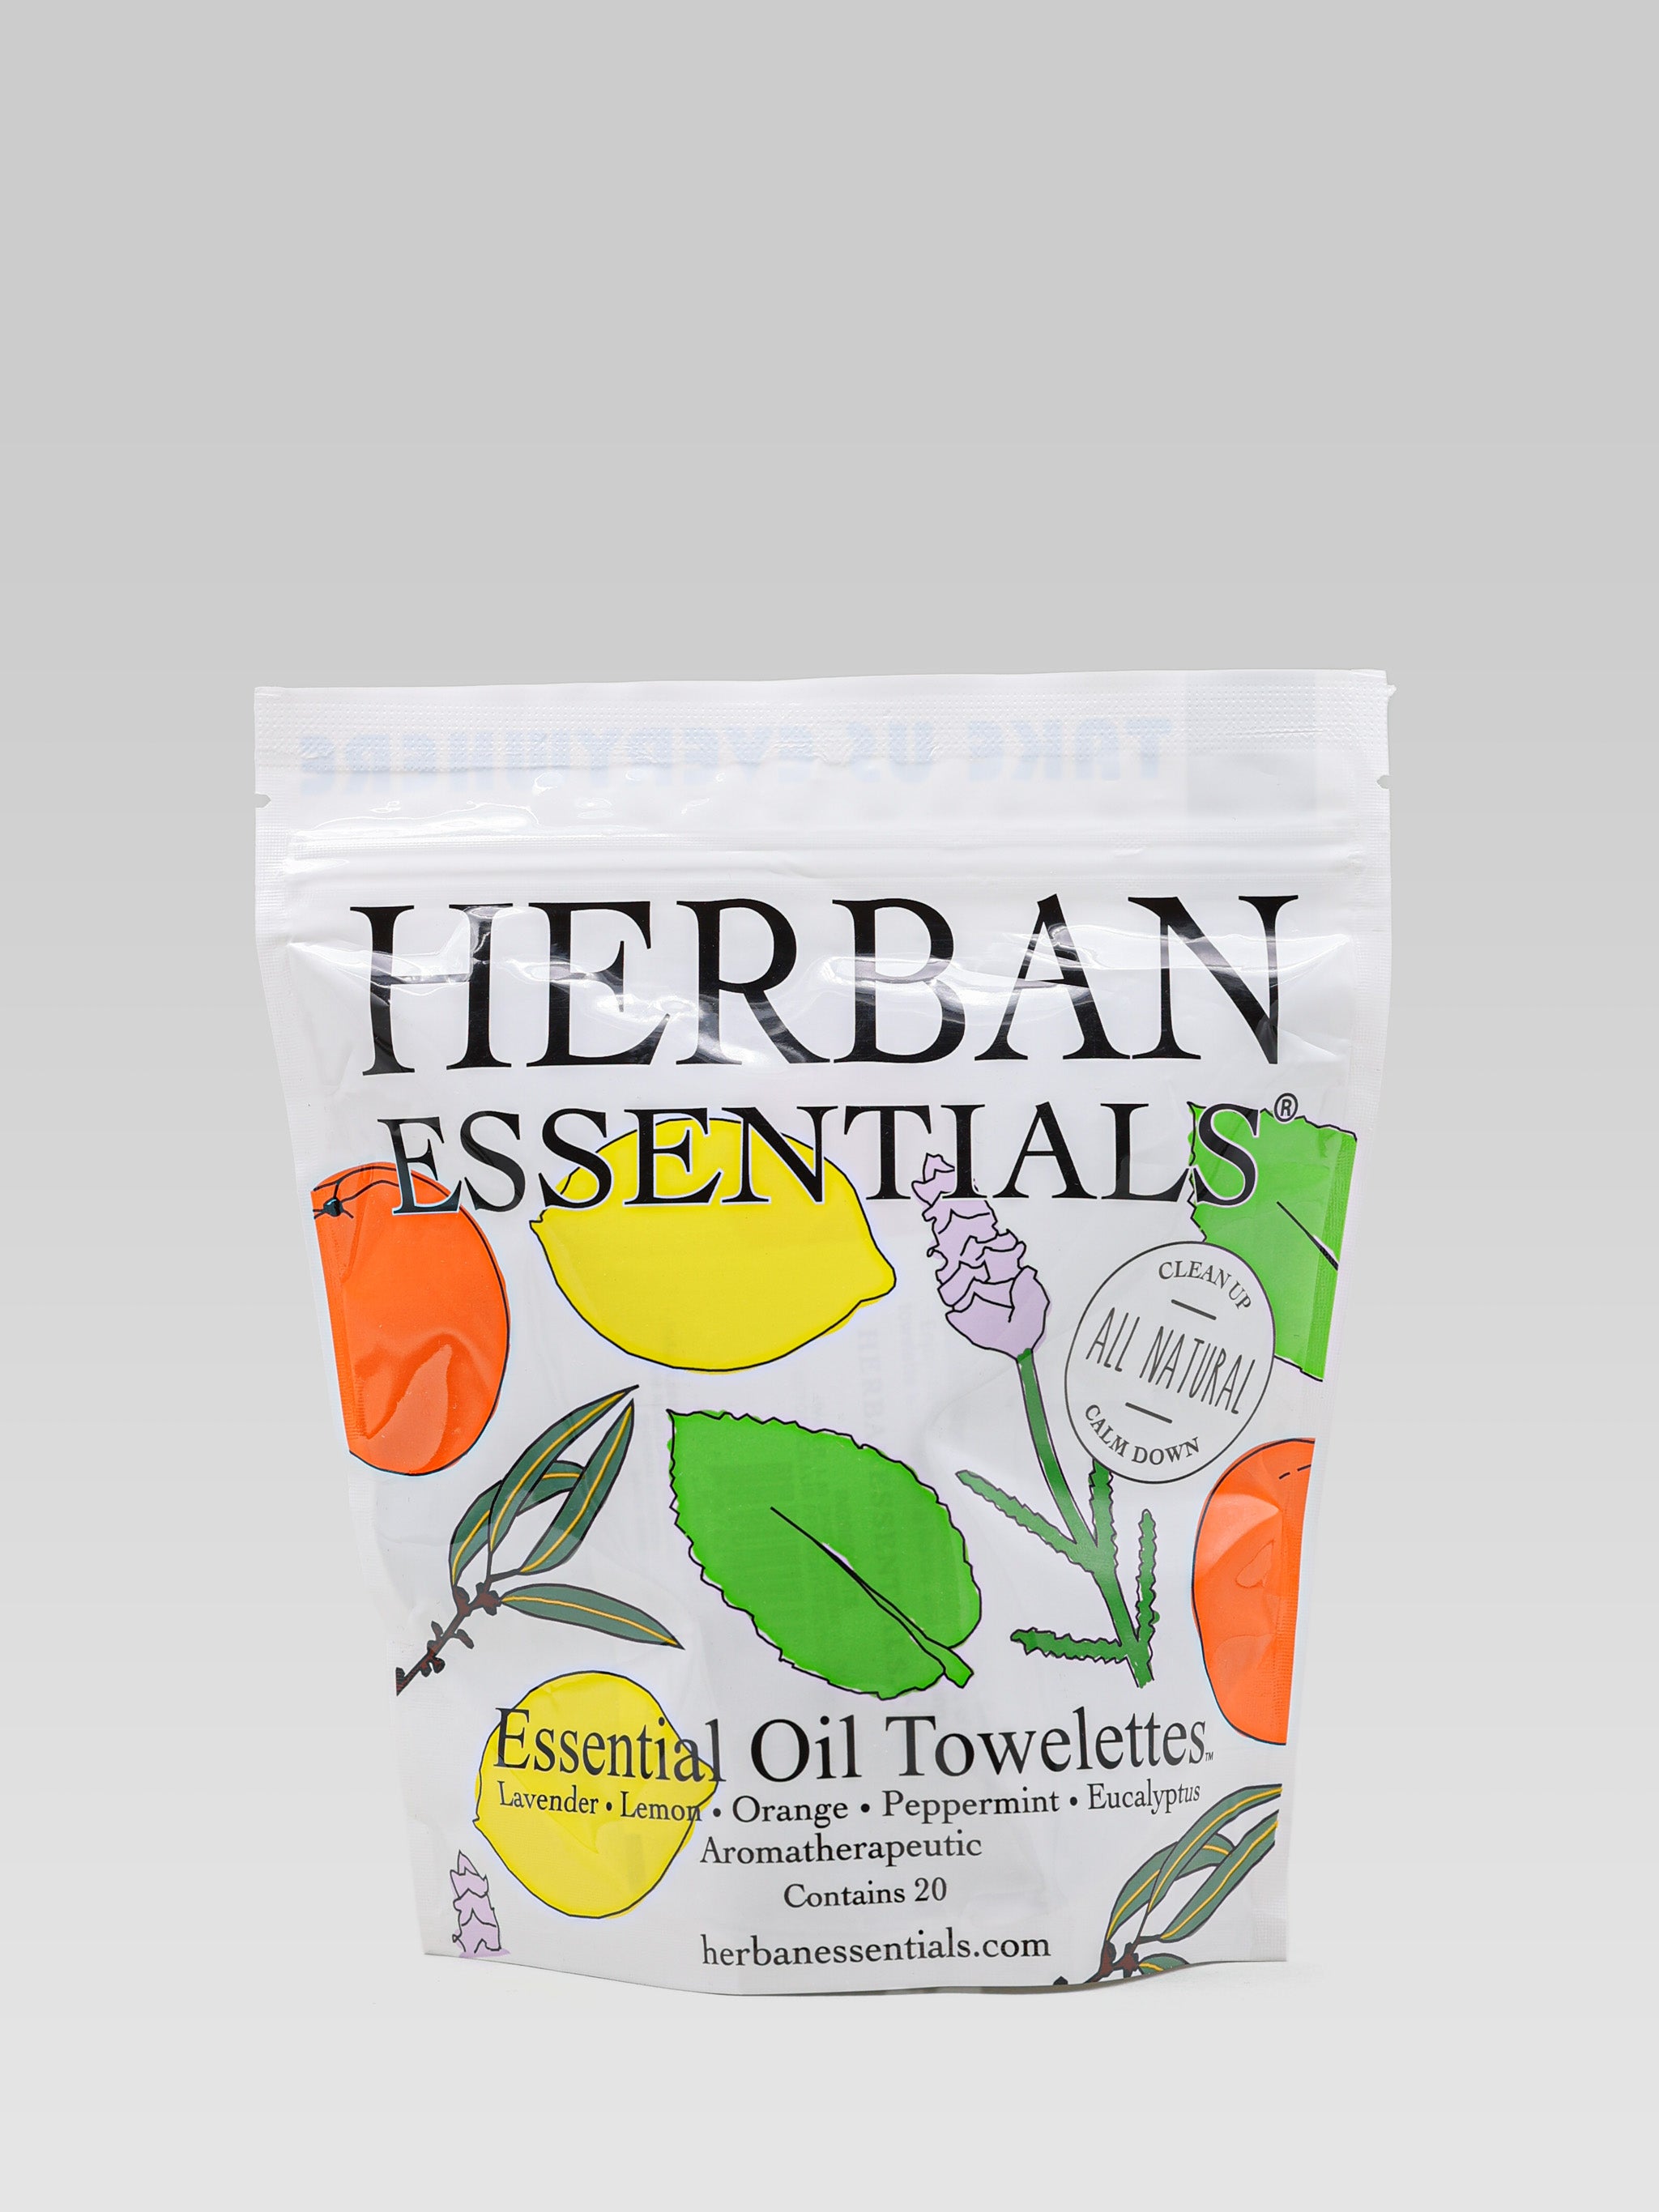 Herban Essentials Essential Oil Towelettes product shot